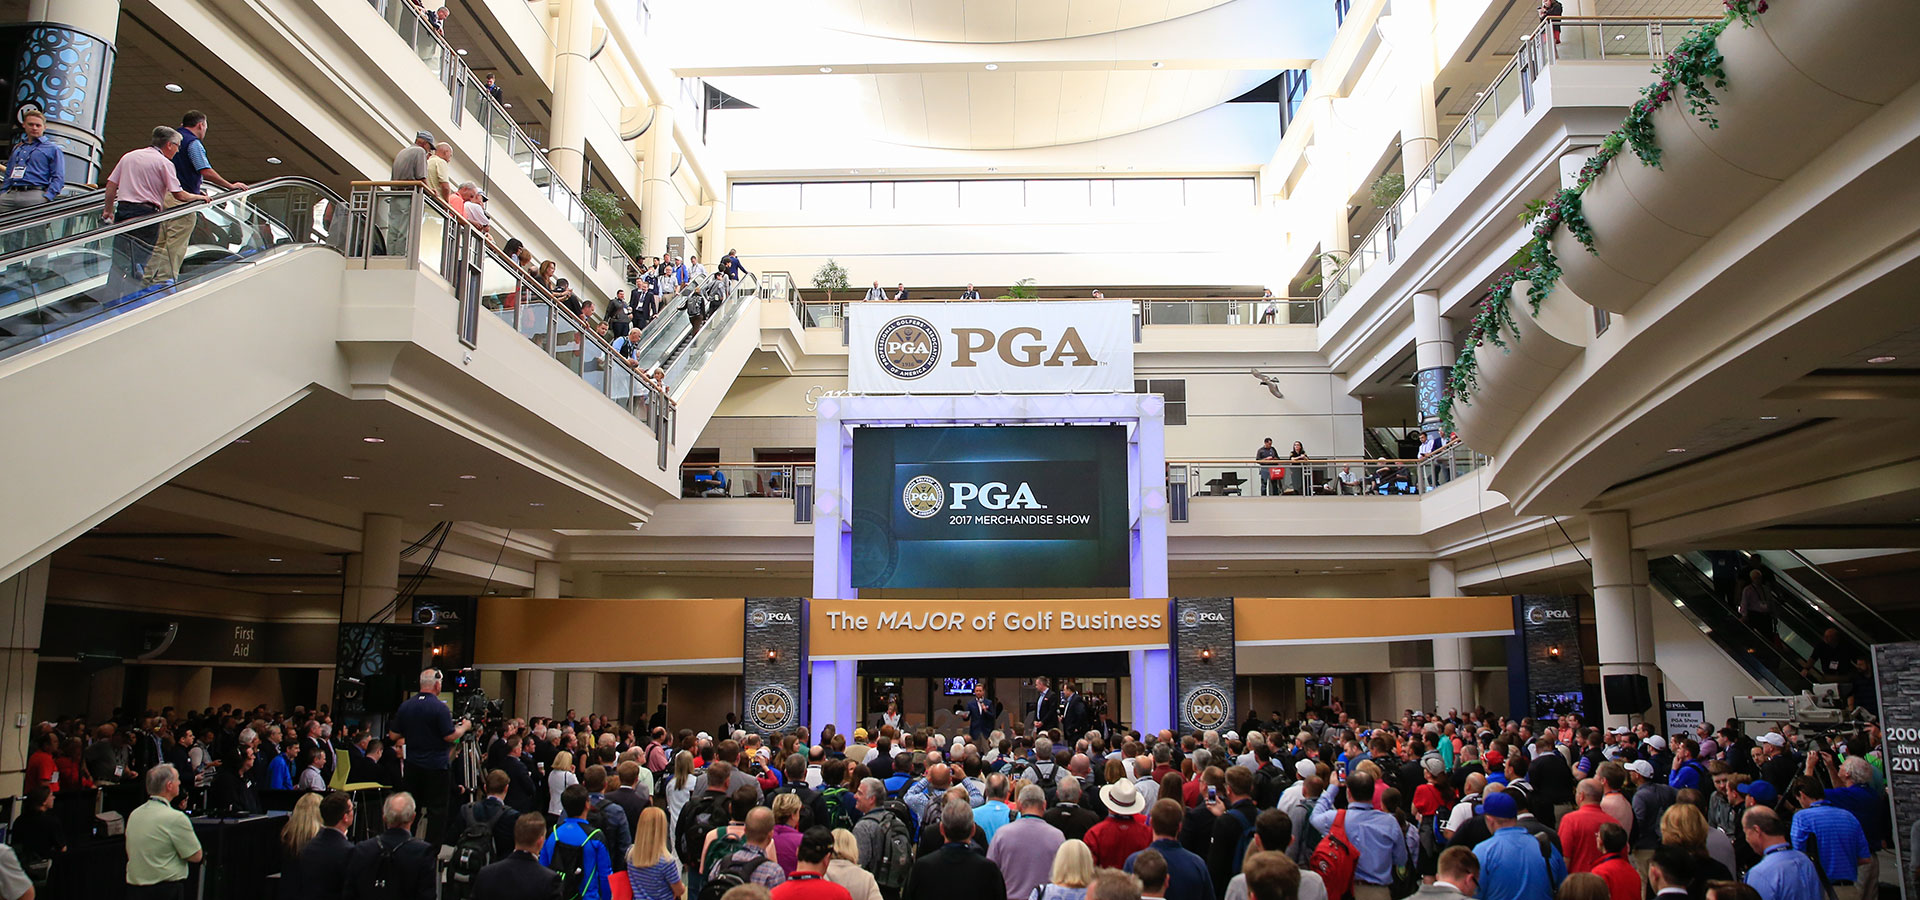 Read our PGA Pro Blog - Scotland for Golf are attending the PGA Show 2018